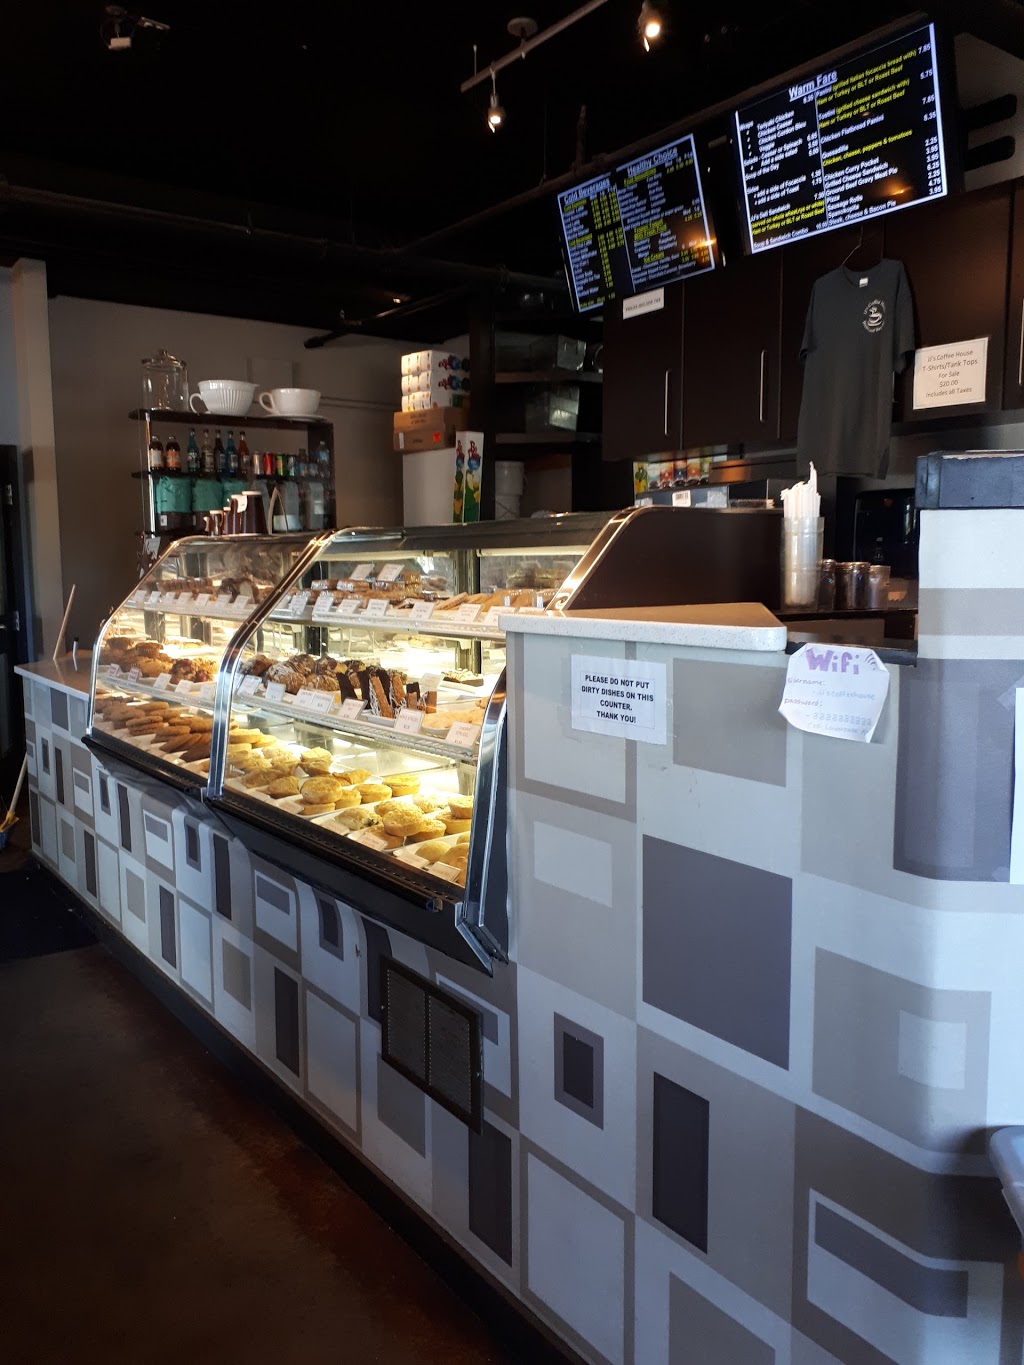 JJs Coffee House | cafe | 7088 W Saanich Rd, Brentwood Bay, BC V8M 1P9, Canada | 2505444344 OR +1 250-544-4344